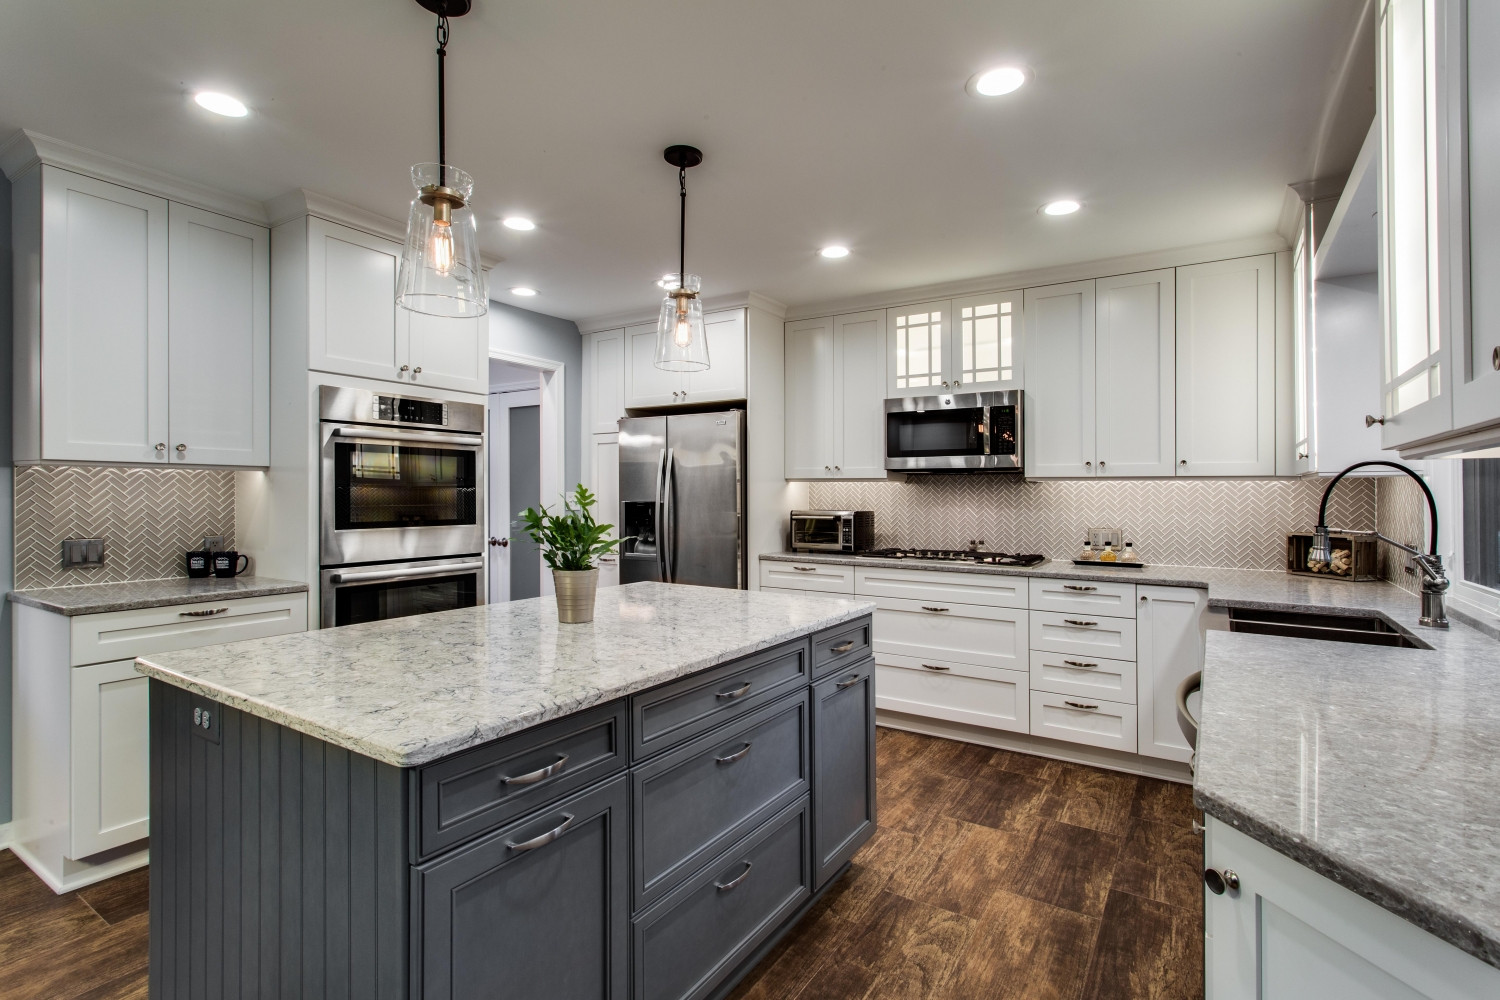 Remodel My Kitchen
 The Best Kitchen Remodel For Your Money